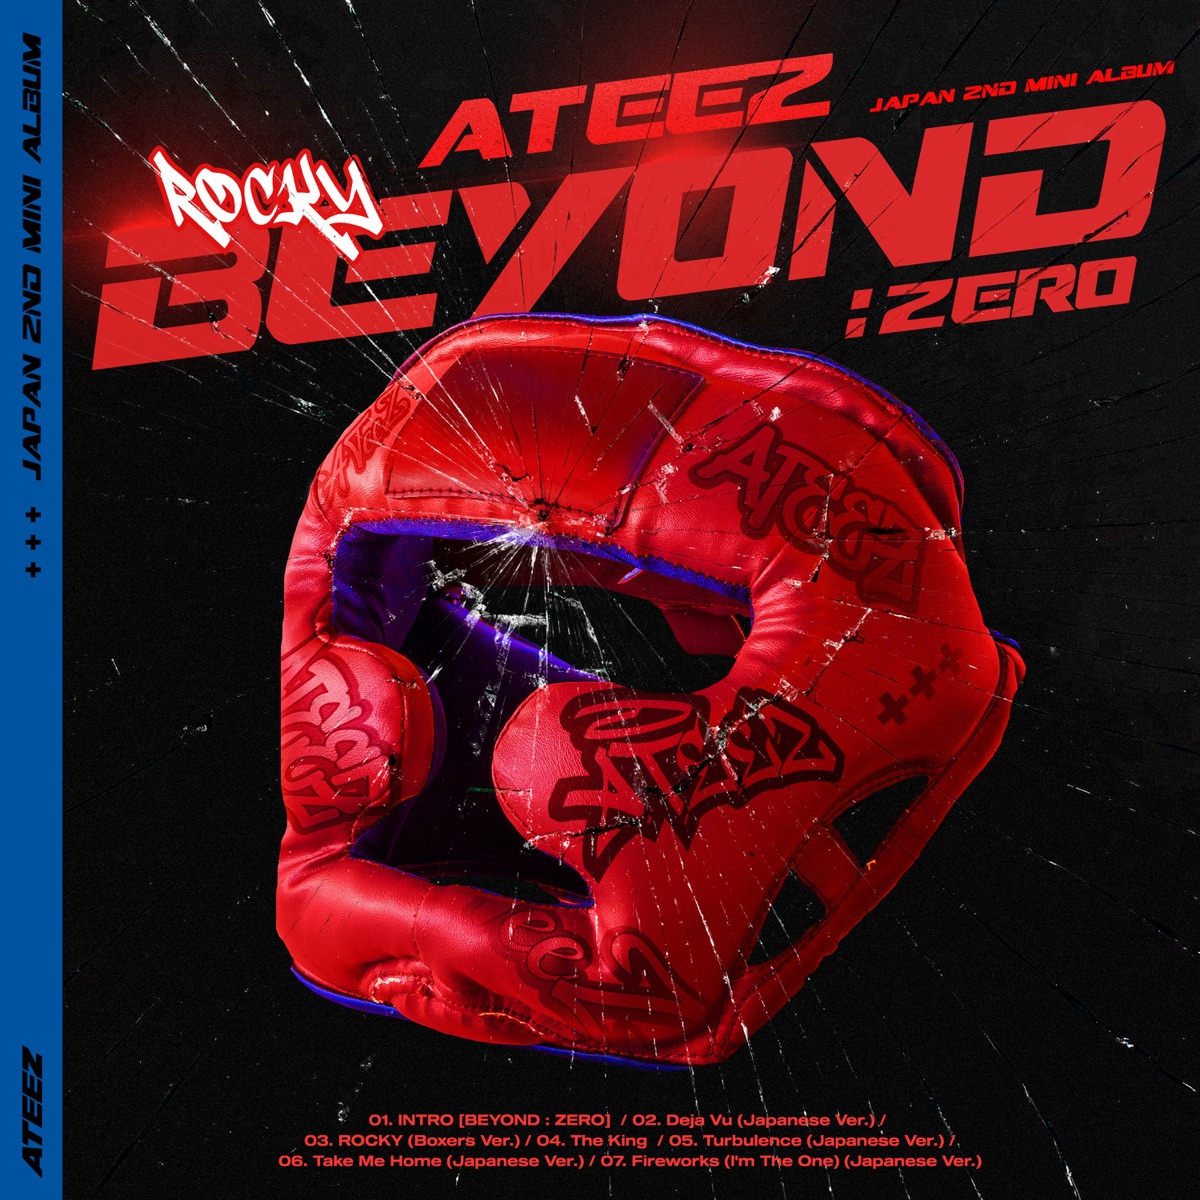 Cover art for『ATEEZ - Turbulence (Japanese Ver.)』from the release『BEYOND : ZERO』